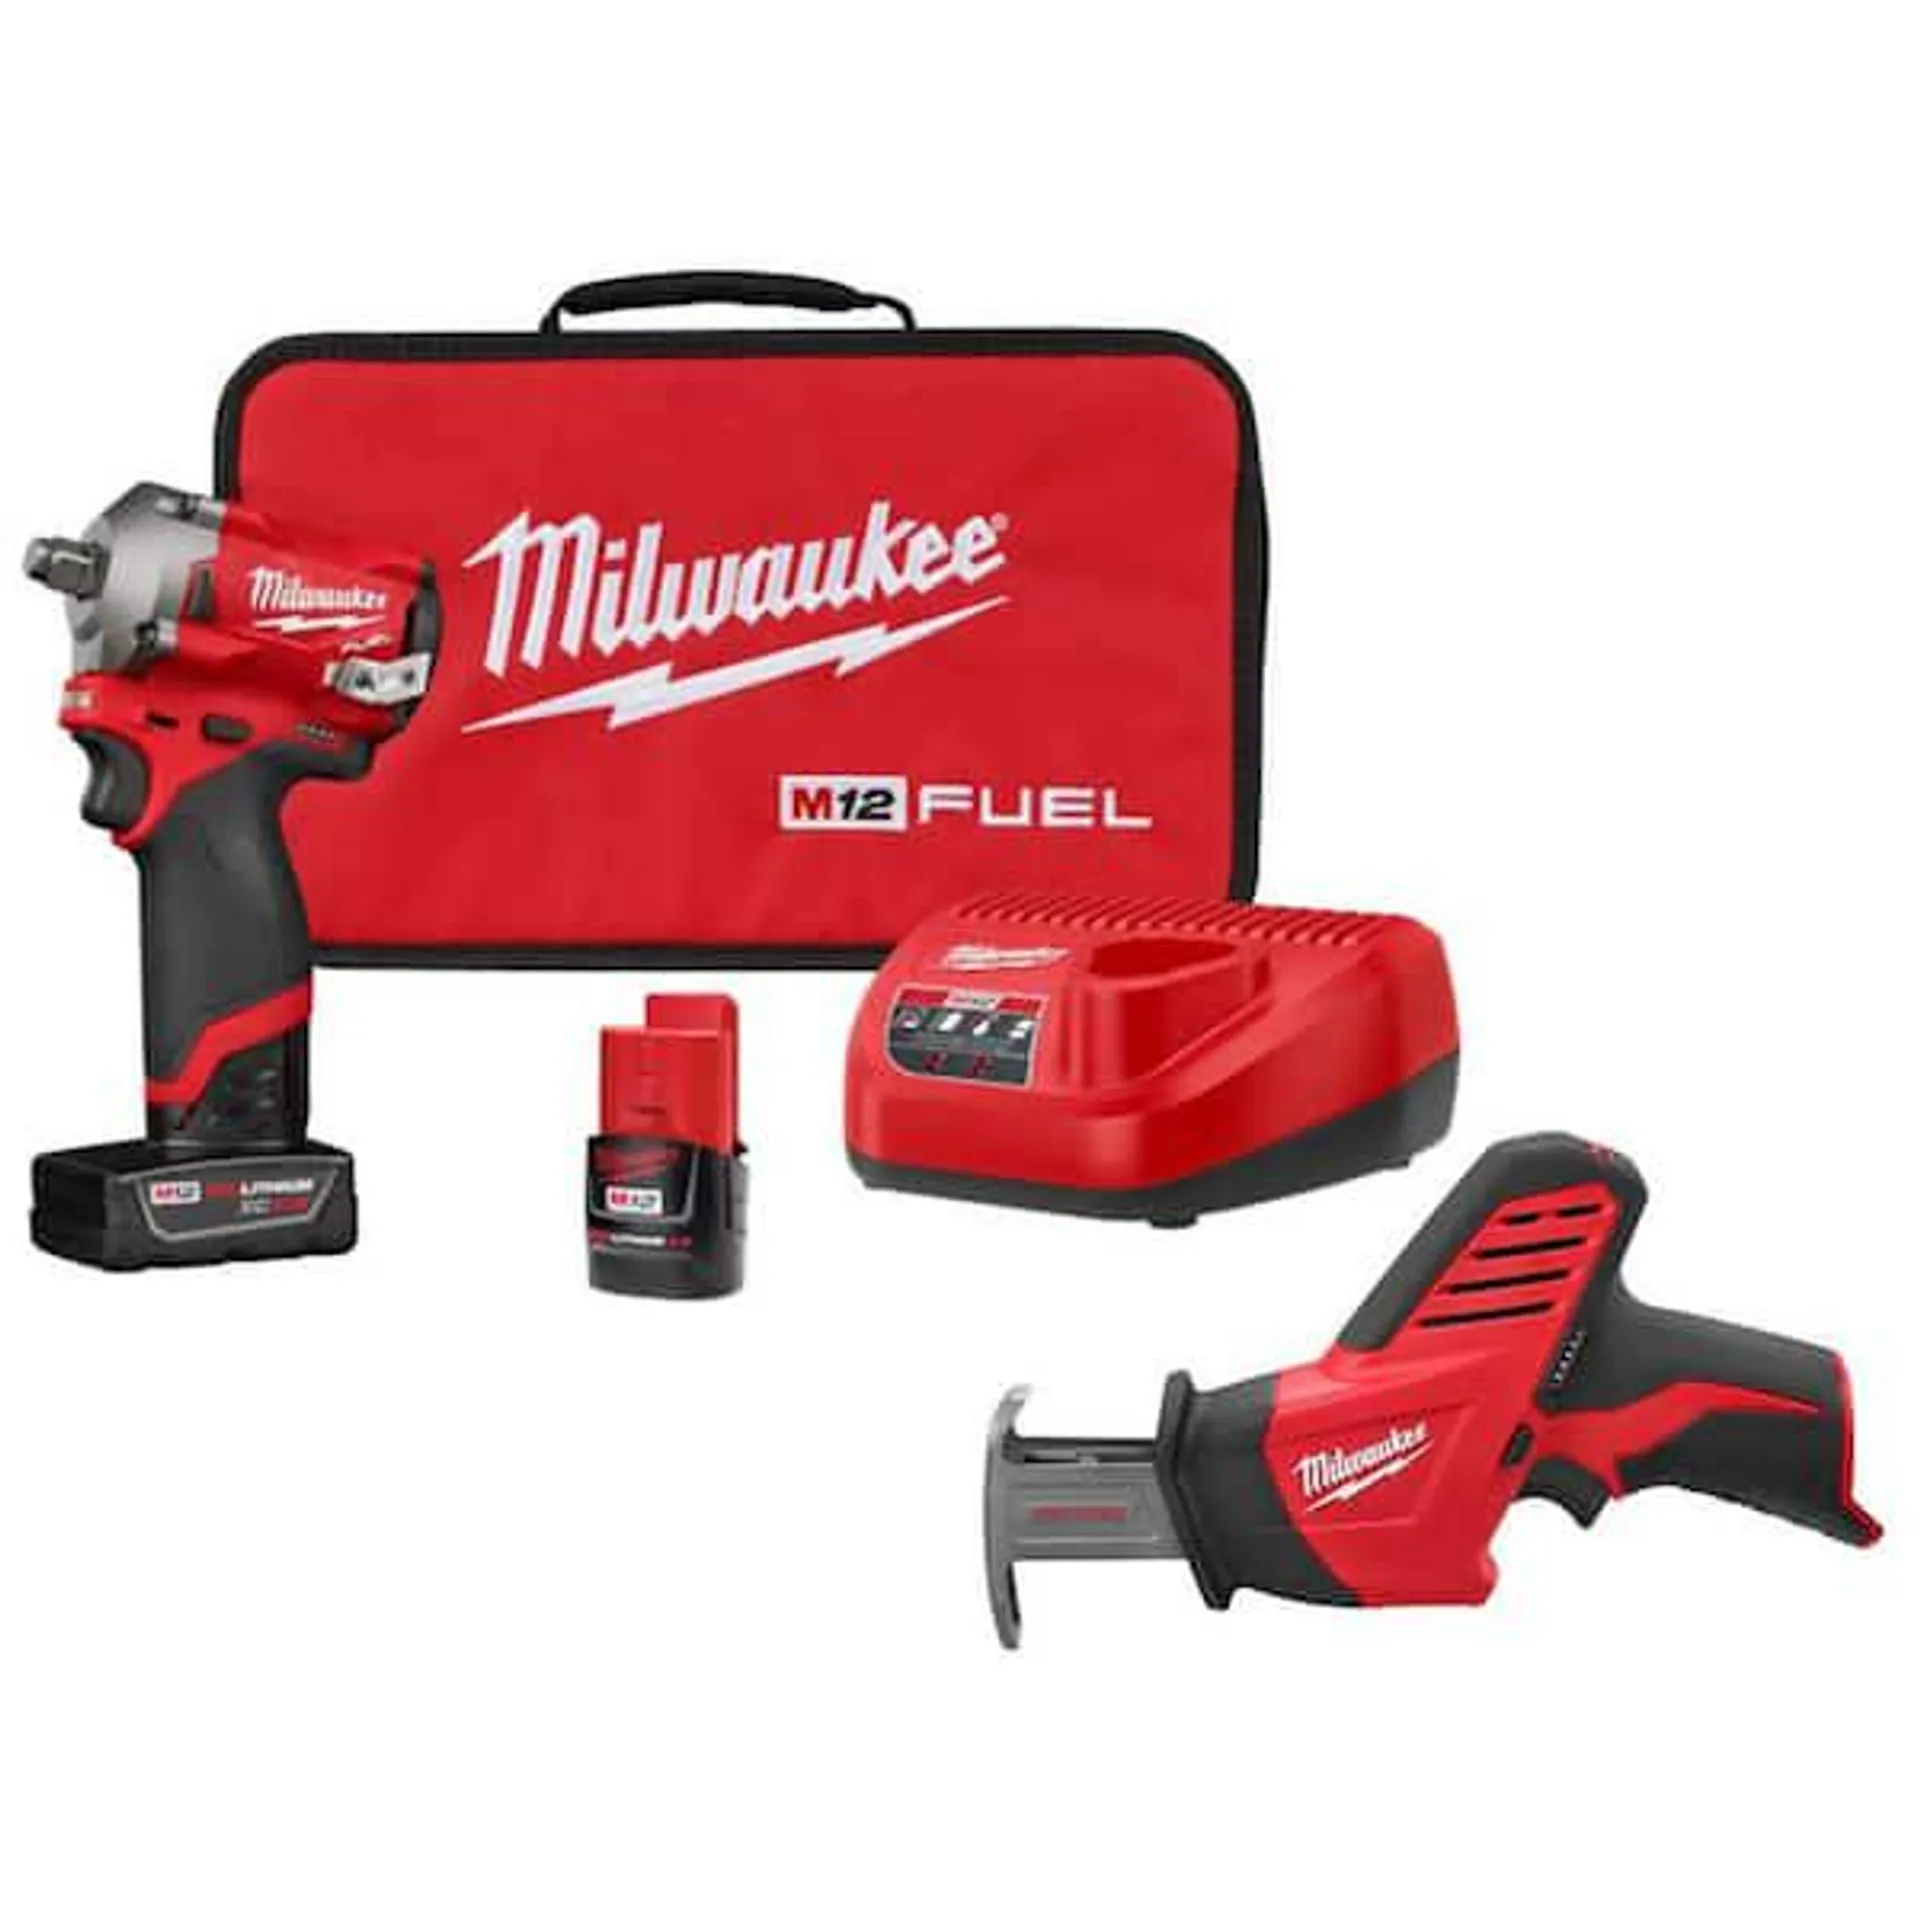 M12 FUEL 12V Lithium-Ion Brushless Cordless Stubby 1/2 in. Impact Wrench Kit w/M12 HACKZALL Reciprocating Saw